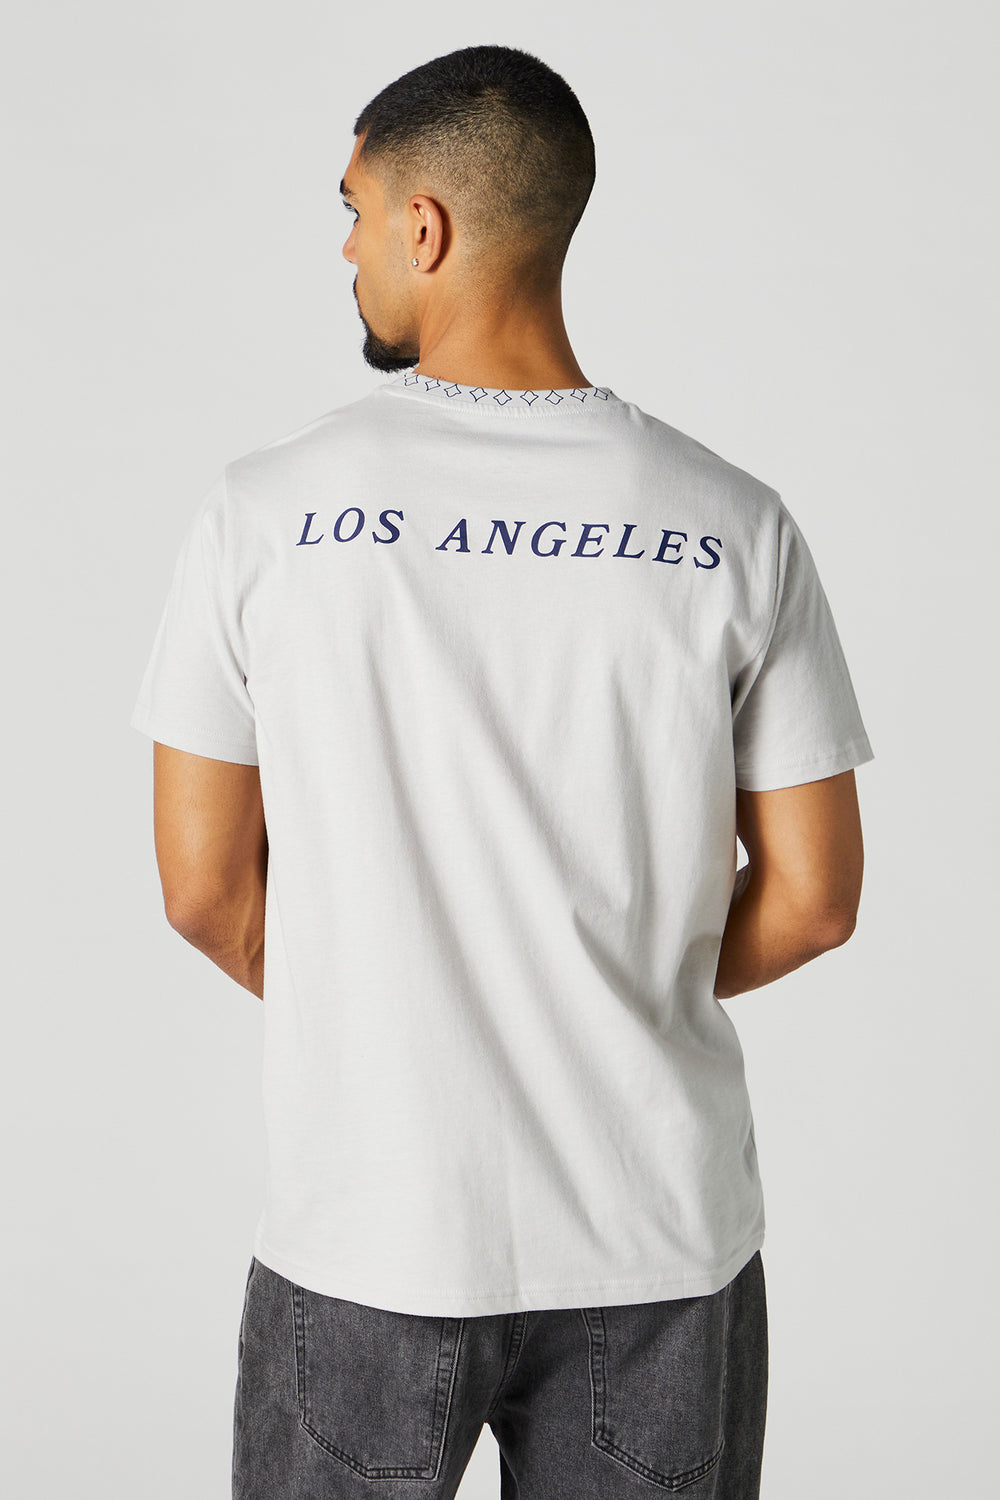 Los Angeles Graphic T-Shirt Los Angeles Graphic T-Shirt 4